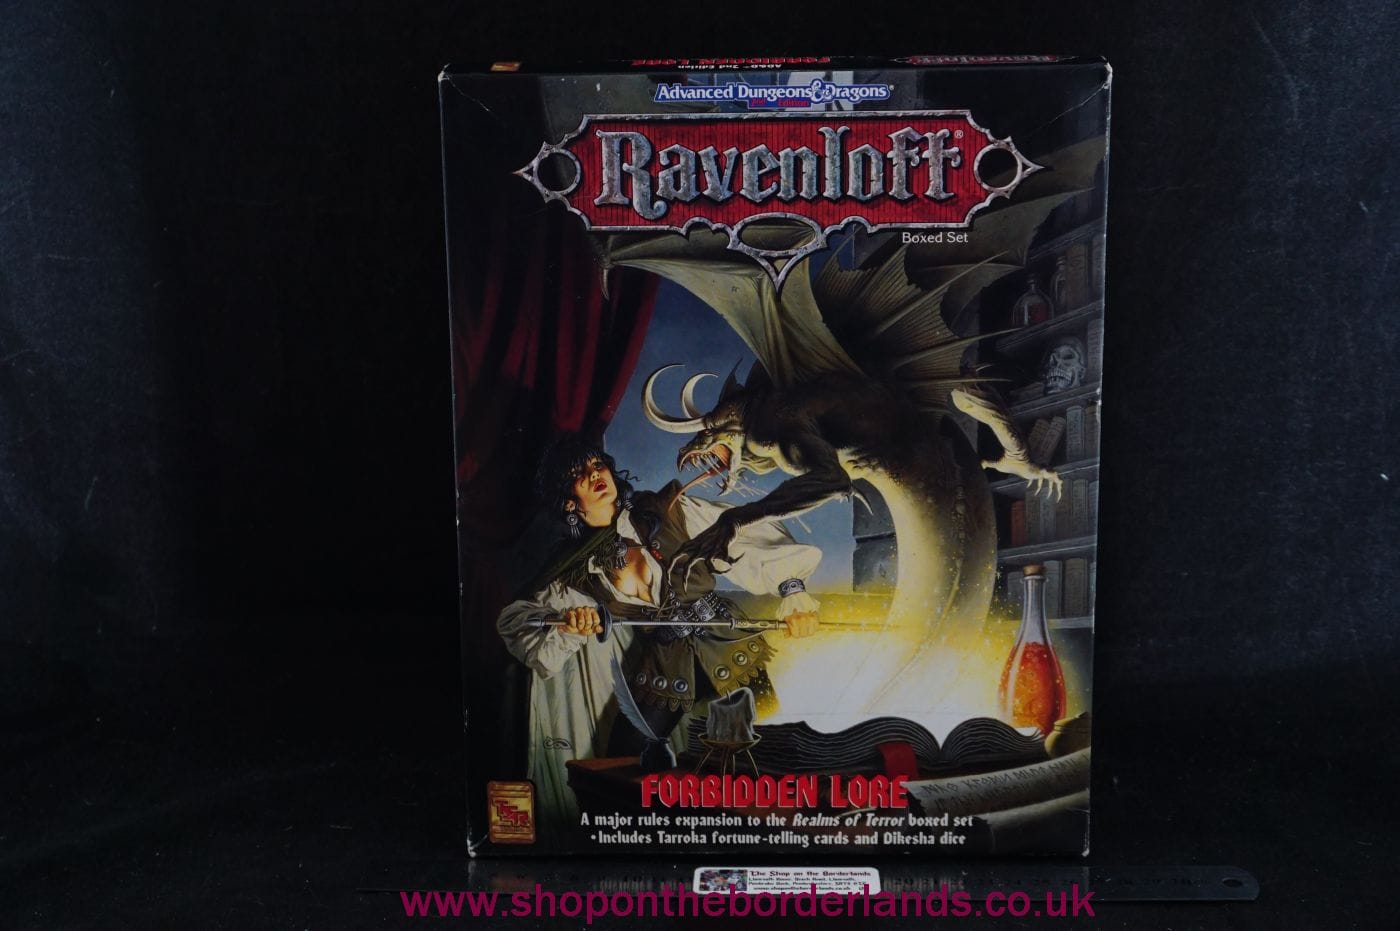 Forbidden Lore, Ravenloft boxed set for AD&D 2nd/2.5th edition 